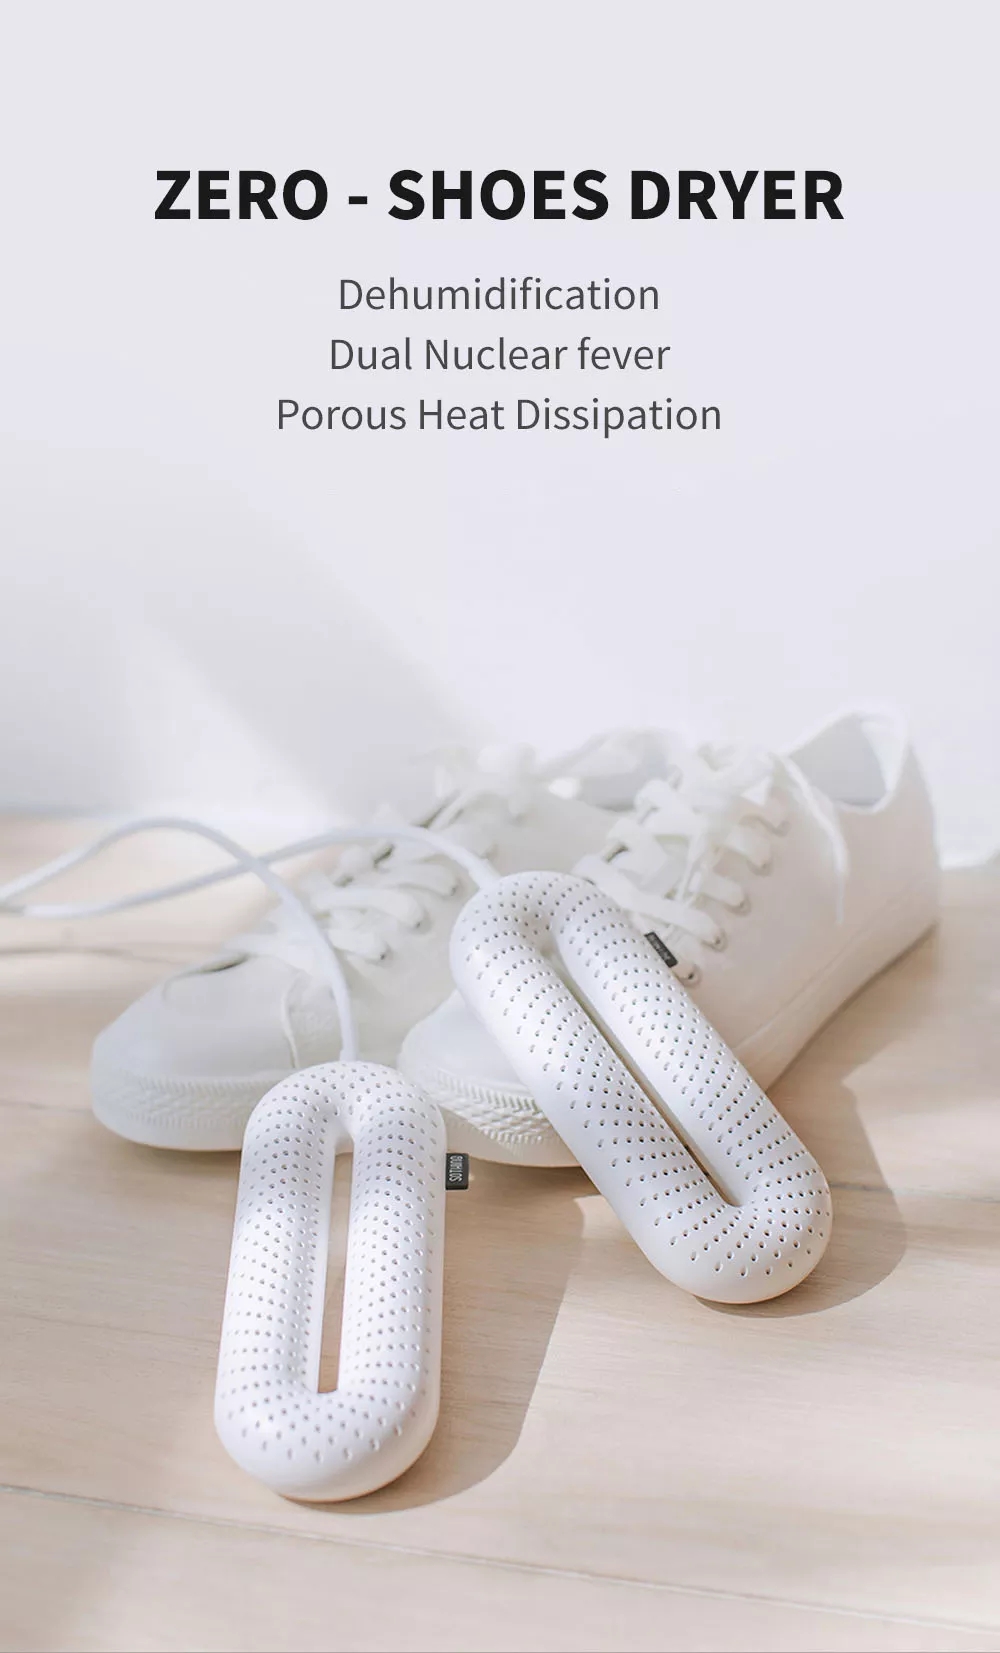 Xiaomi Sothing Shoe Dryer Foot Protector Boot Deodorant Dehumidify Device Winter Shoes Drier Heater 